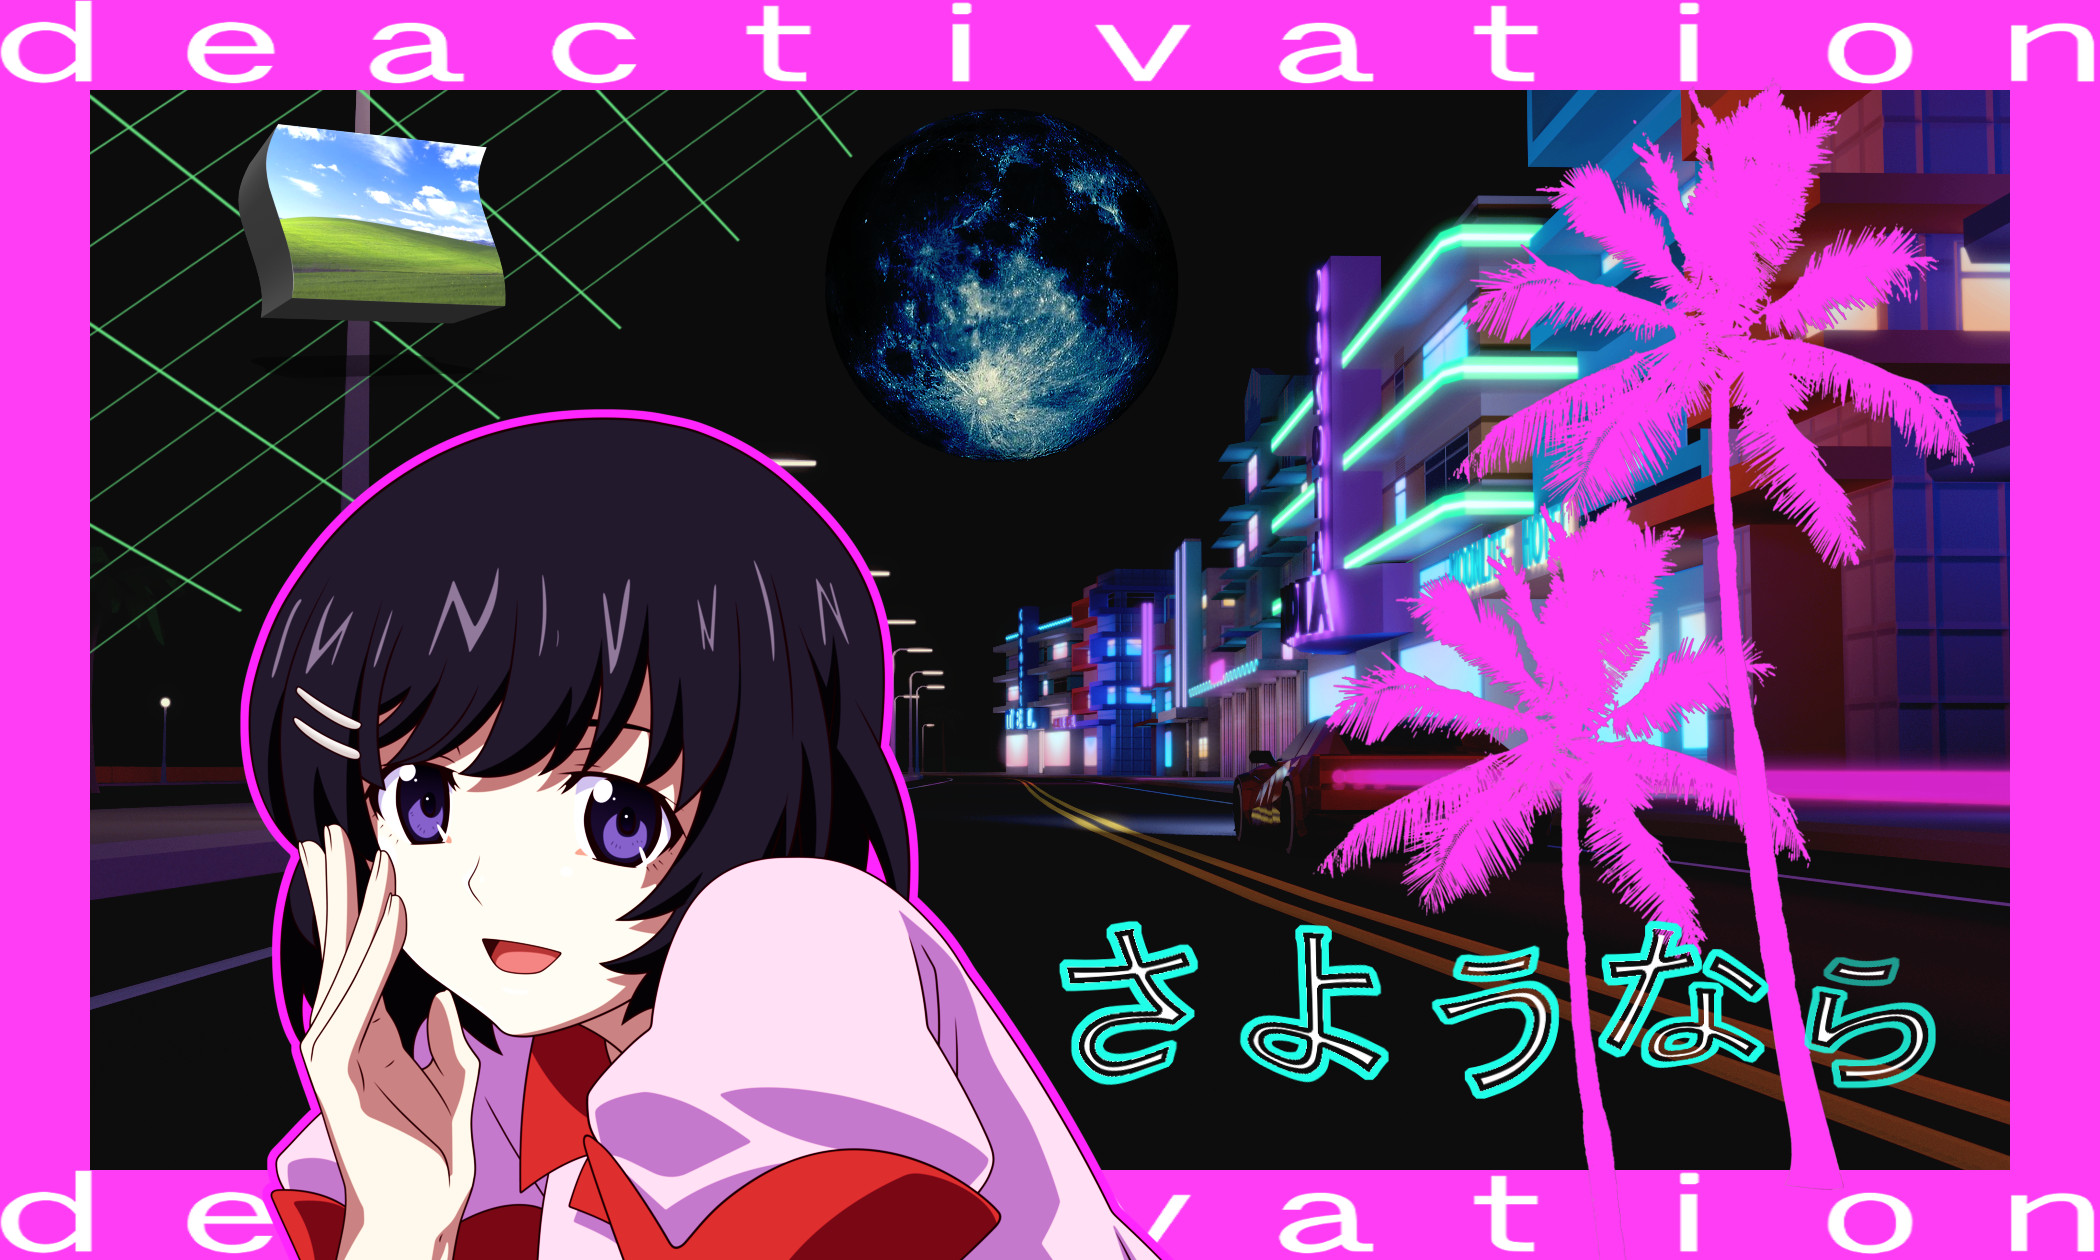 My Anime Vaporwave Wallpaper #09 by iamthebest052 on ...